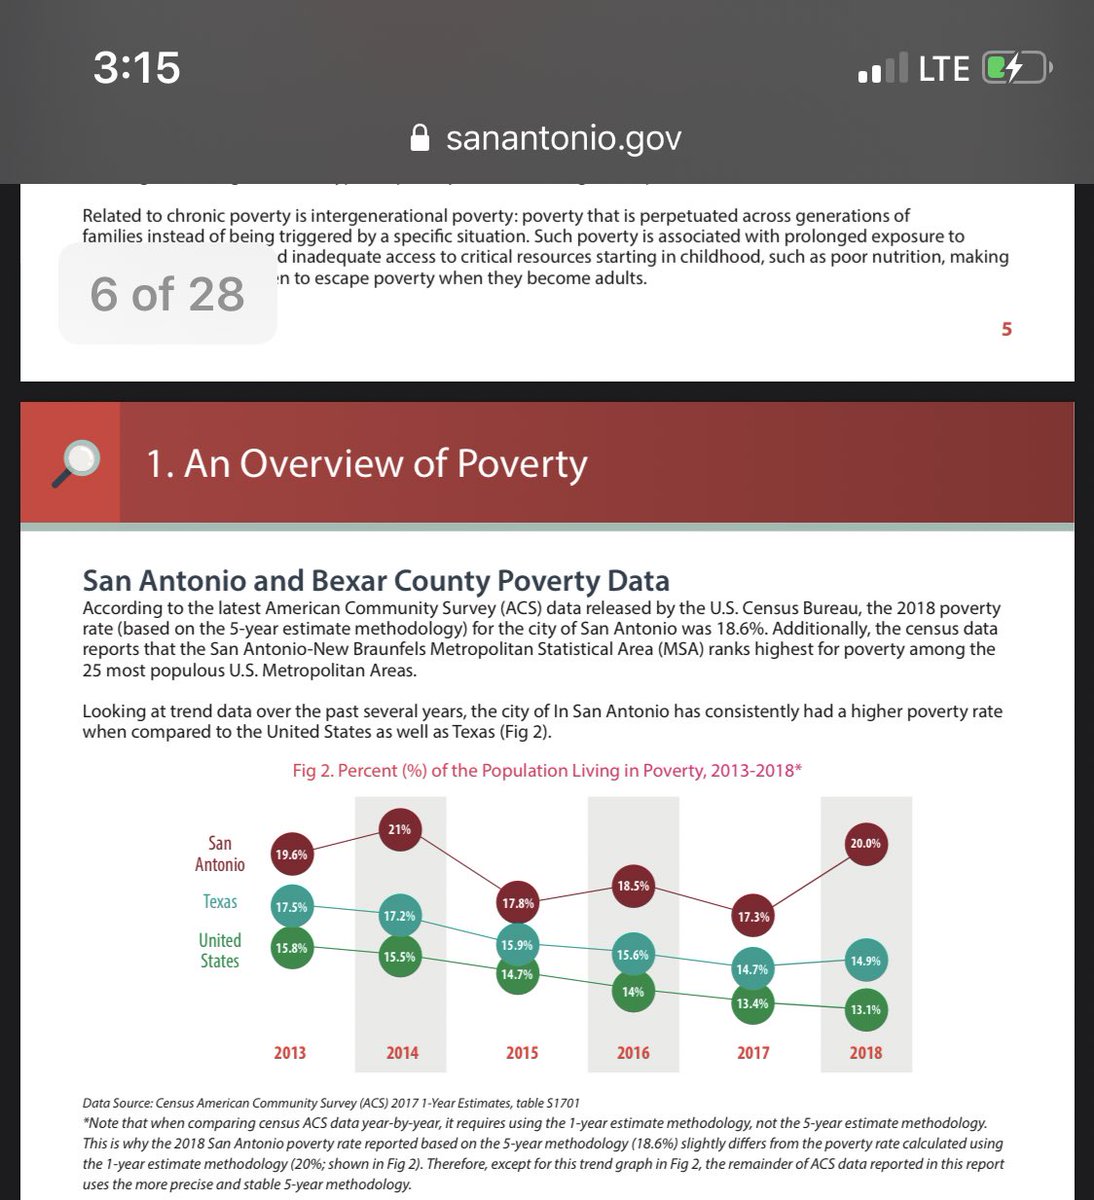 according to the cenus, the poverty rate in 2018 in San Antonio, tx was 18.6% which ranked the san antonio-new braunfels metropolitan area as the HIGHEST for poverty among the 25 most populous cities in the USA